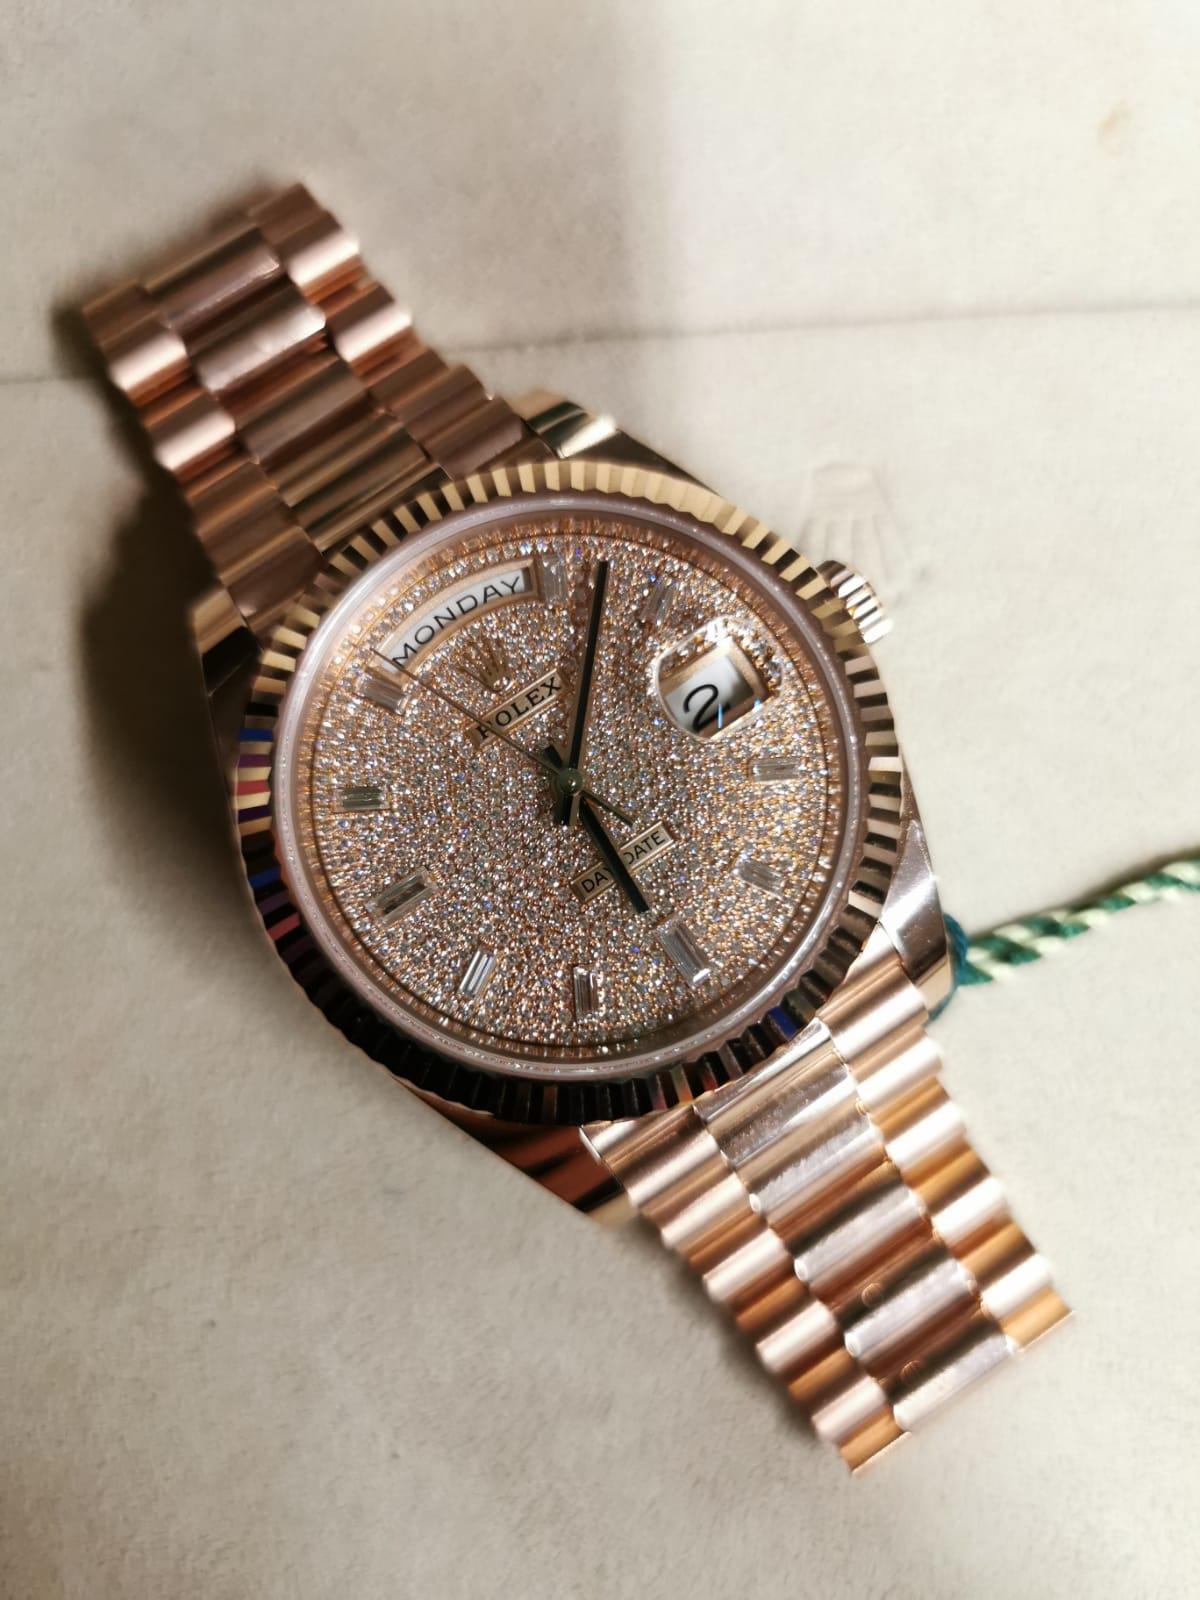 The Oyster Perpetual Day-Date 40 in 18 ct Everose gold with a diamond-paved dial, Fluted bezel and a President bracelet. The Day-Date was the first watch to indicate the day of the week spelt out in full when it was first presented in 1956.

A